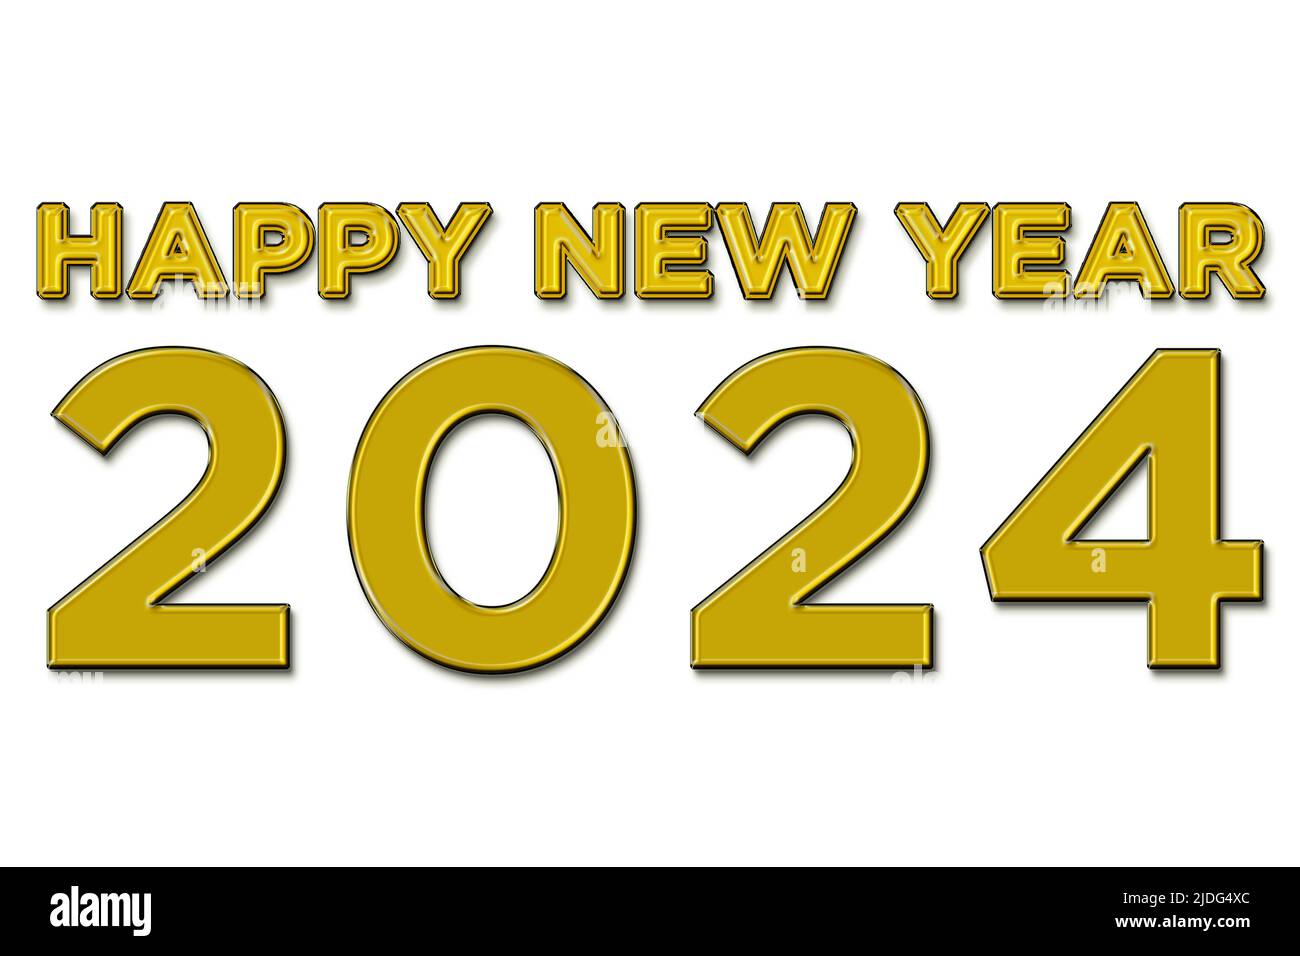 Happy new year 2024 illustration in yellow color text on white background Stock Photo